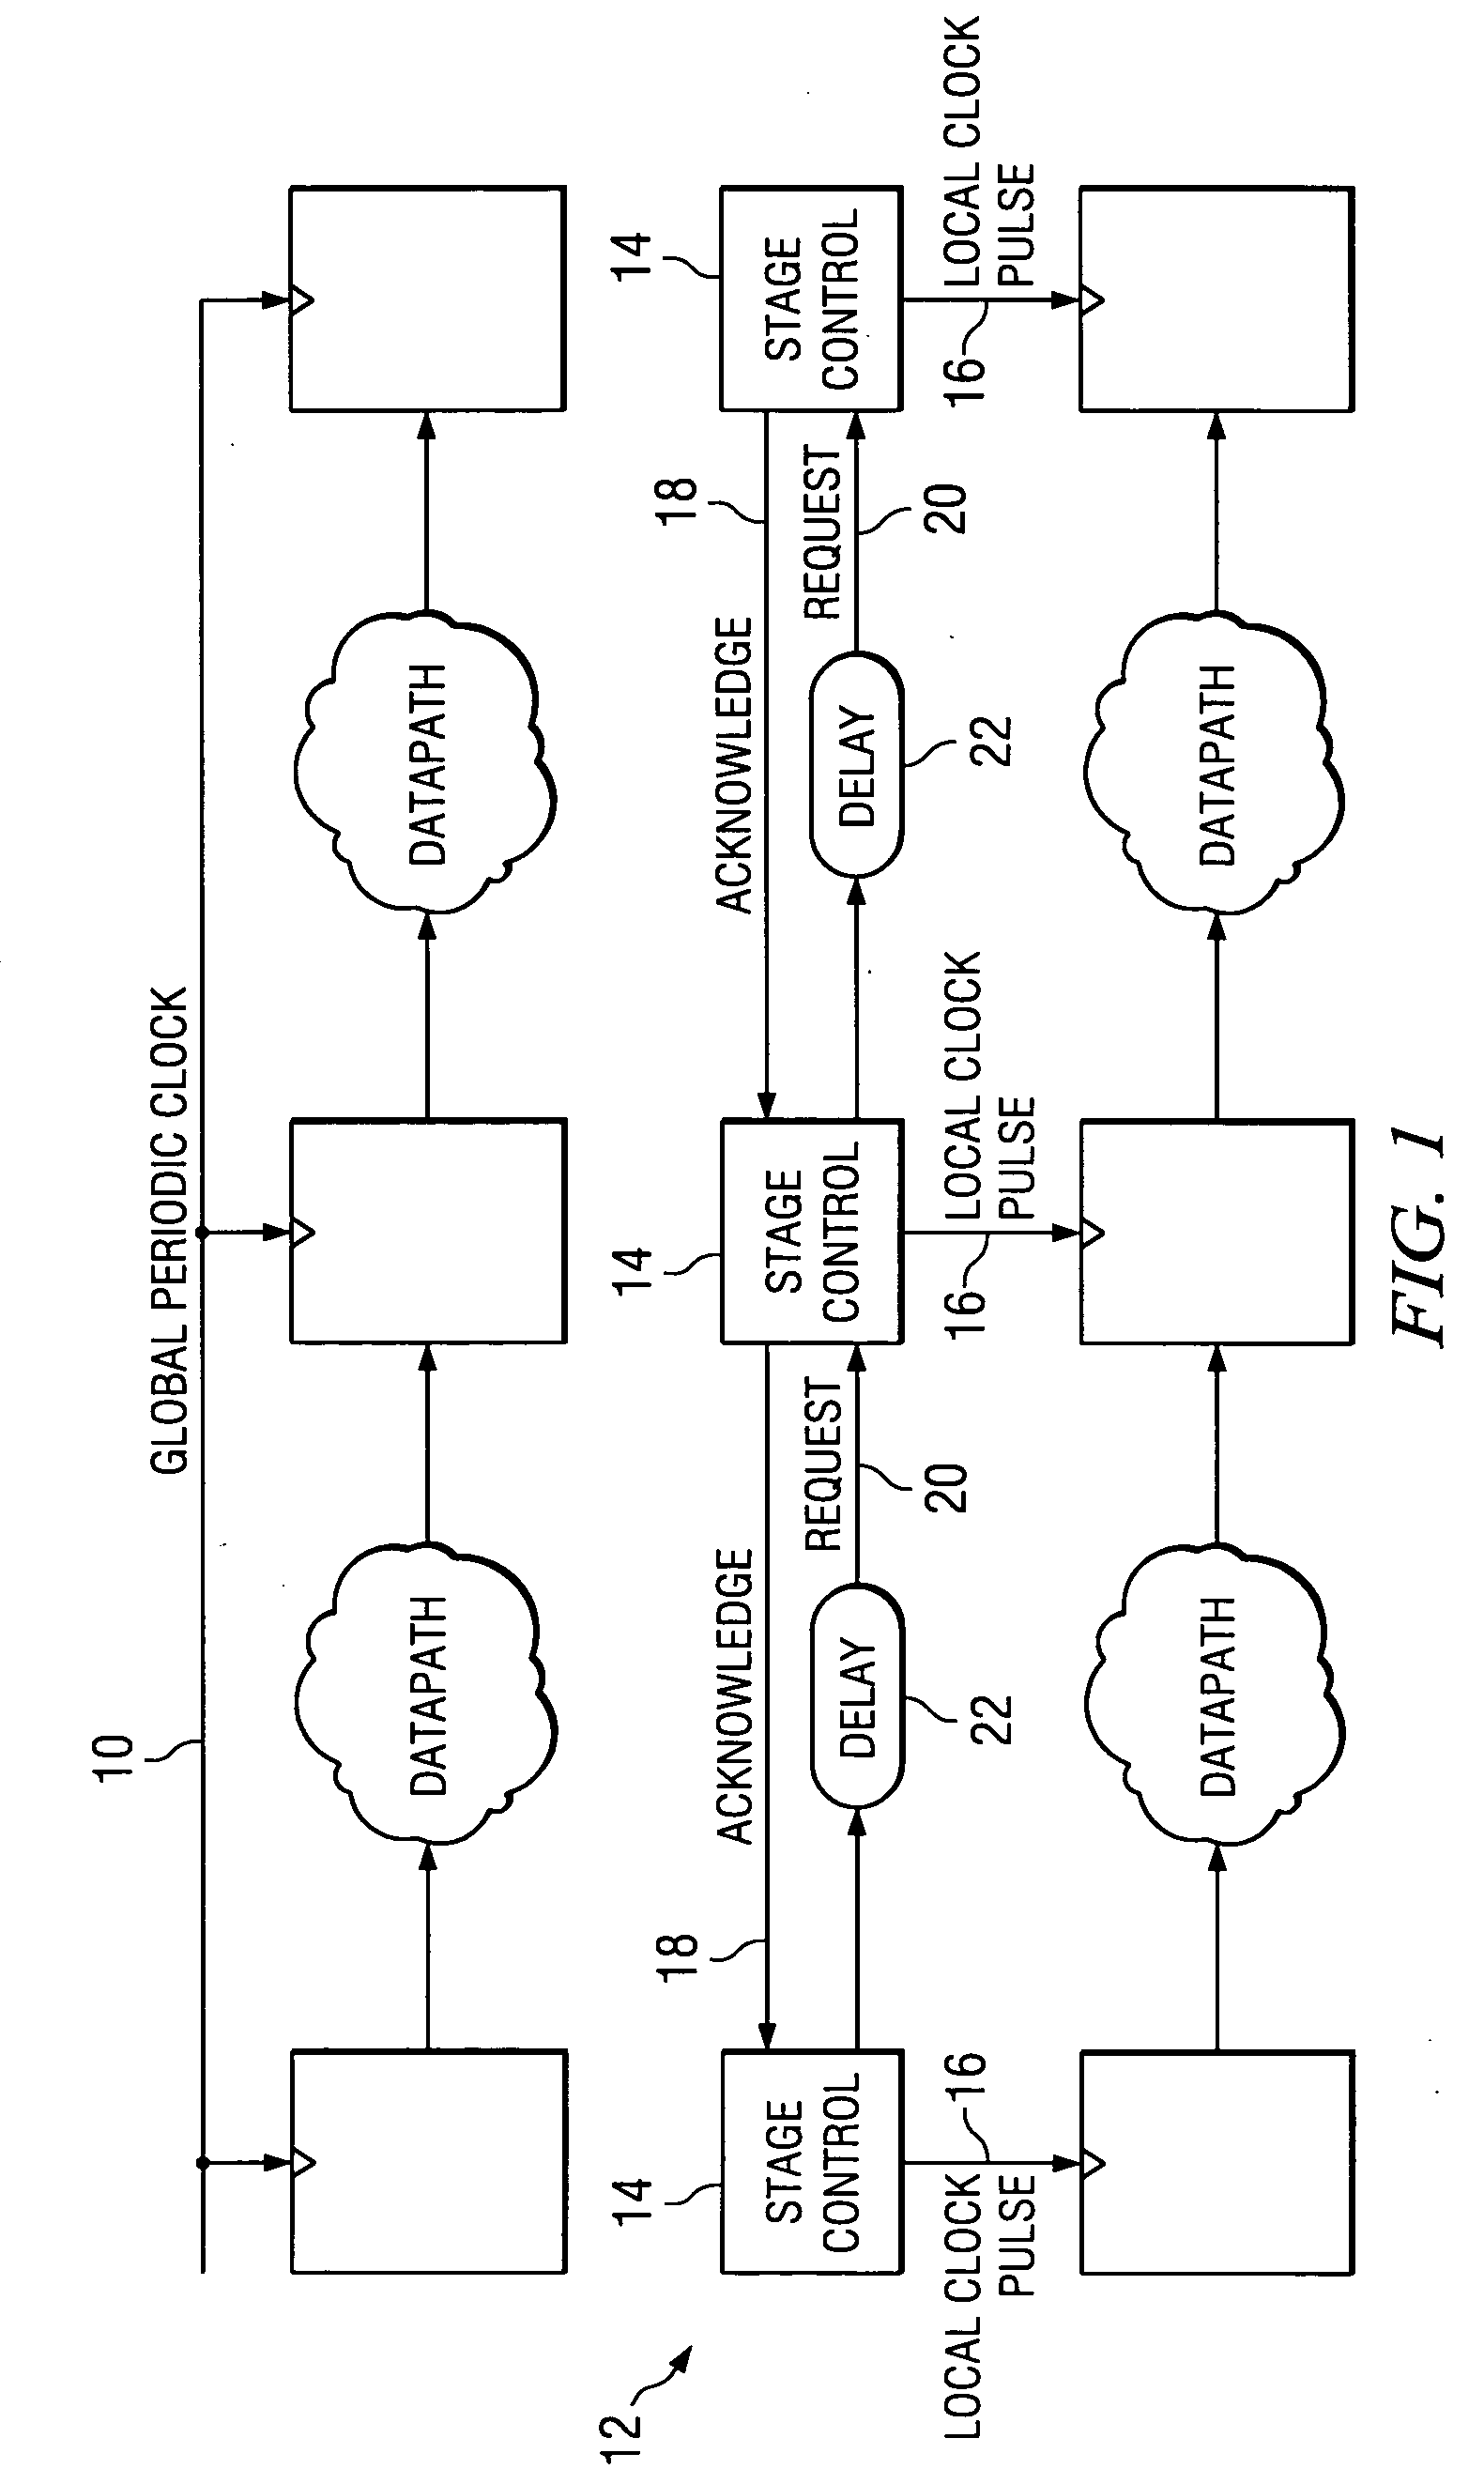 System & method for asynchronous logic synthesis from high-level synchronous descriptions